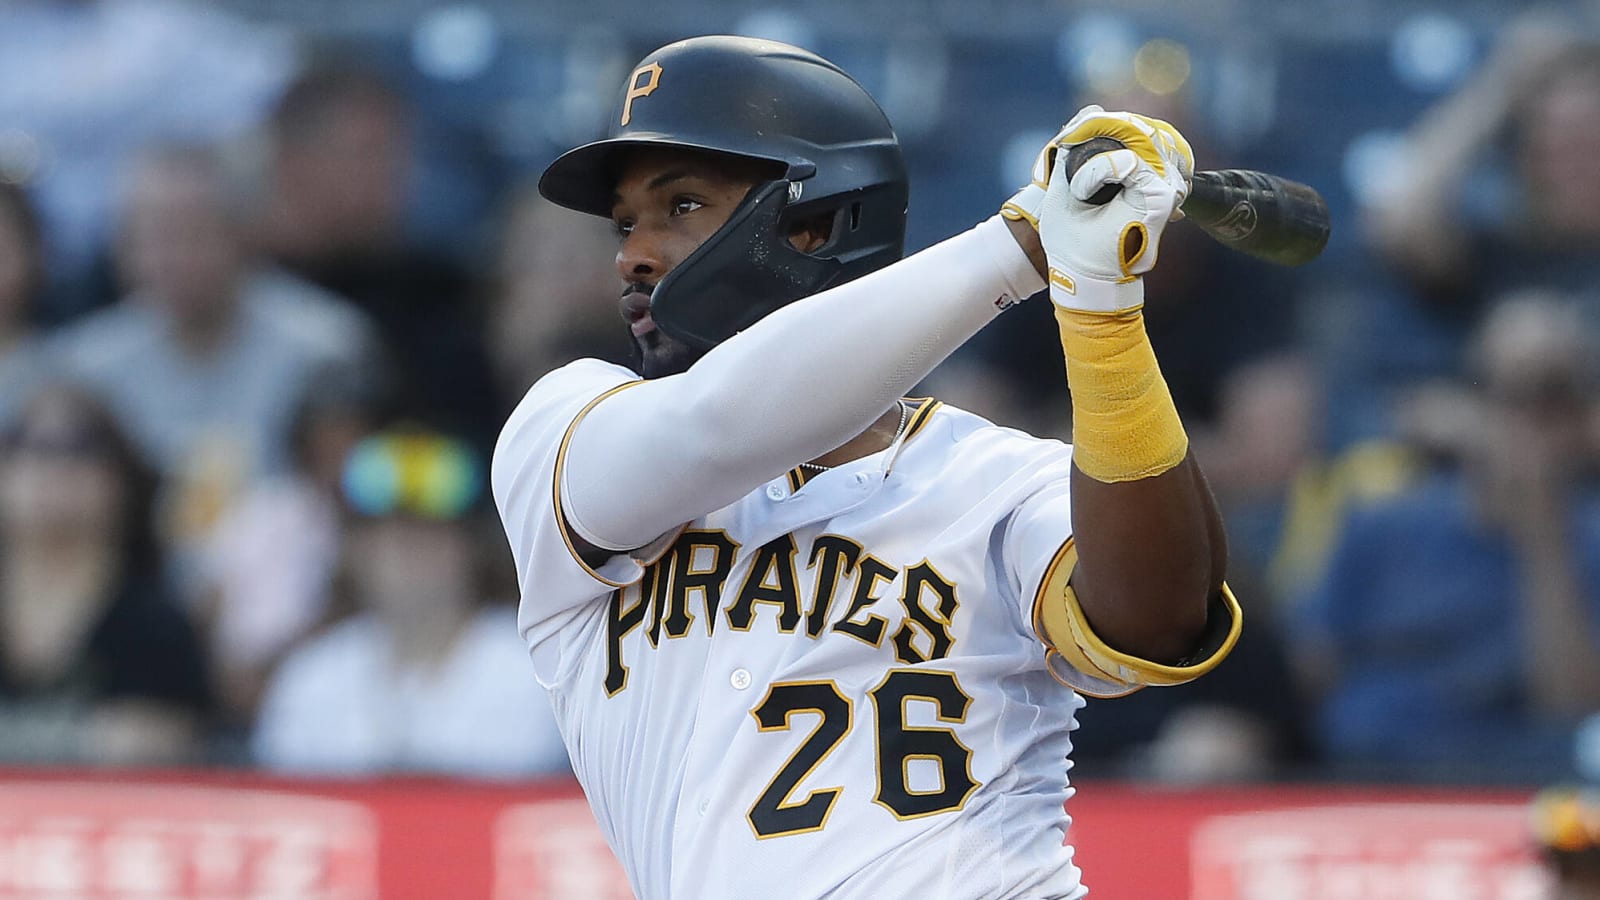 Pirates place former Yankees standout on waivers